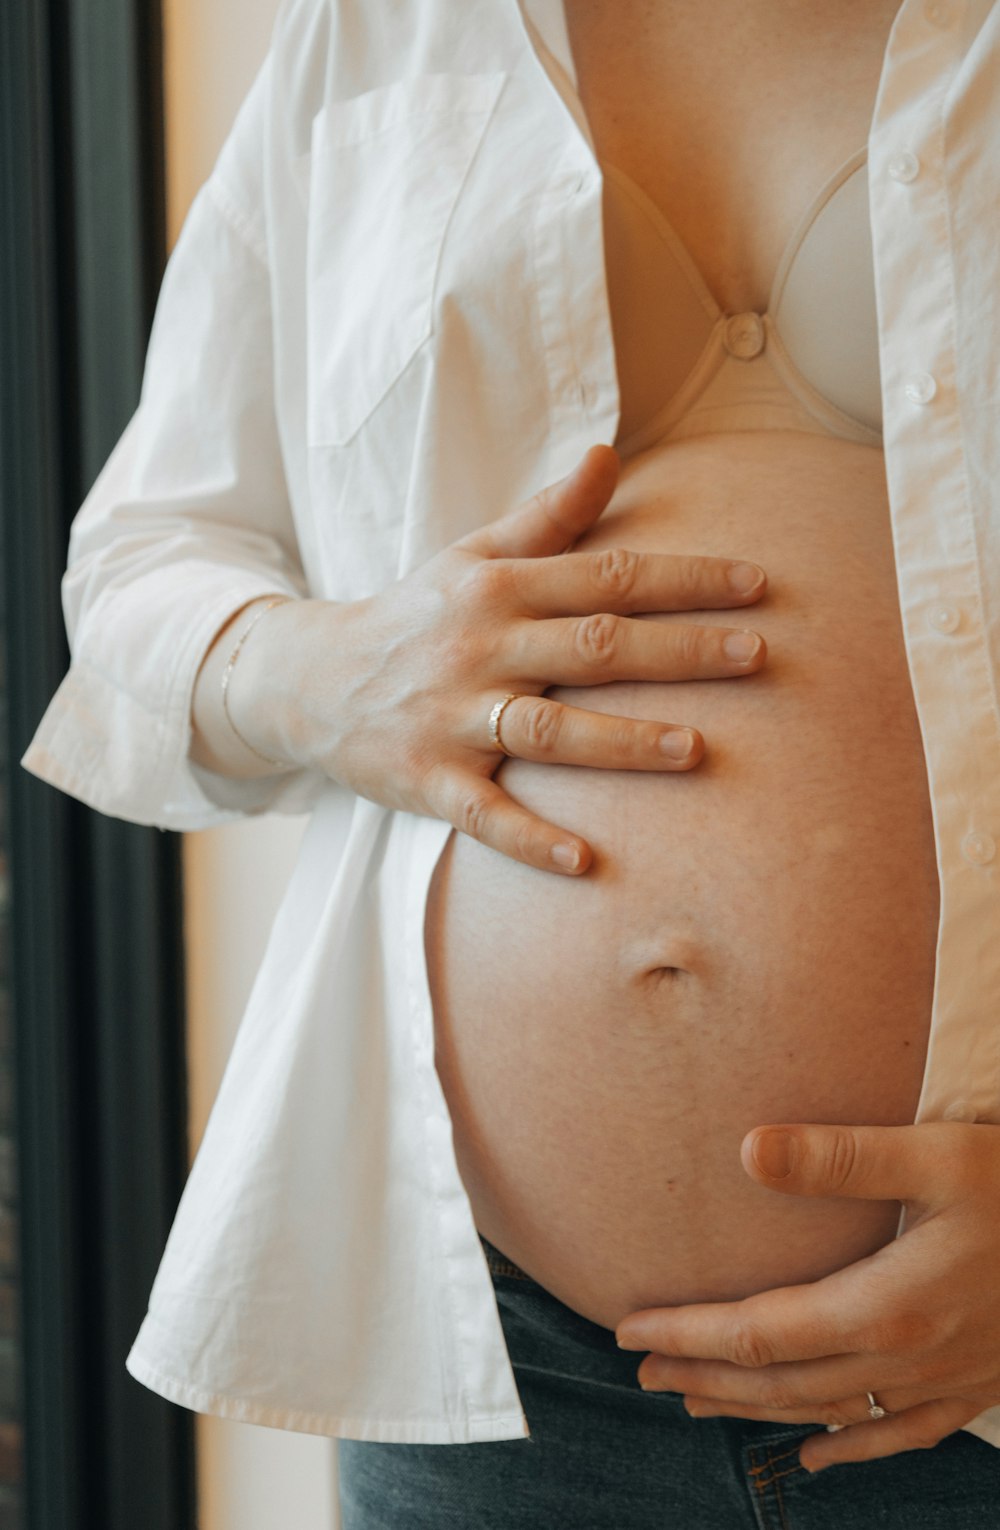 a pregnant woman with her hands on her stomach